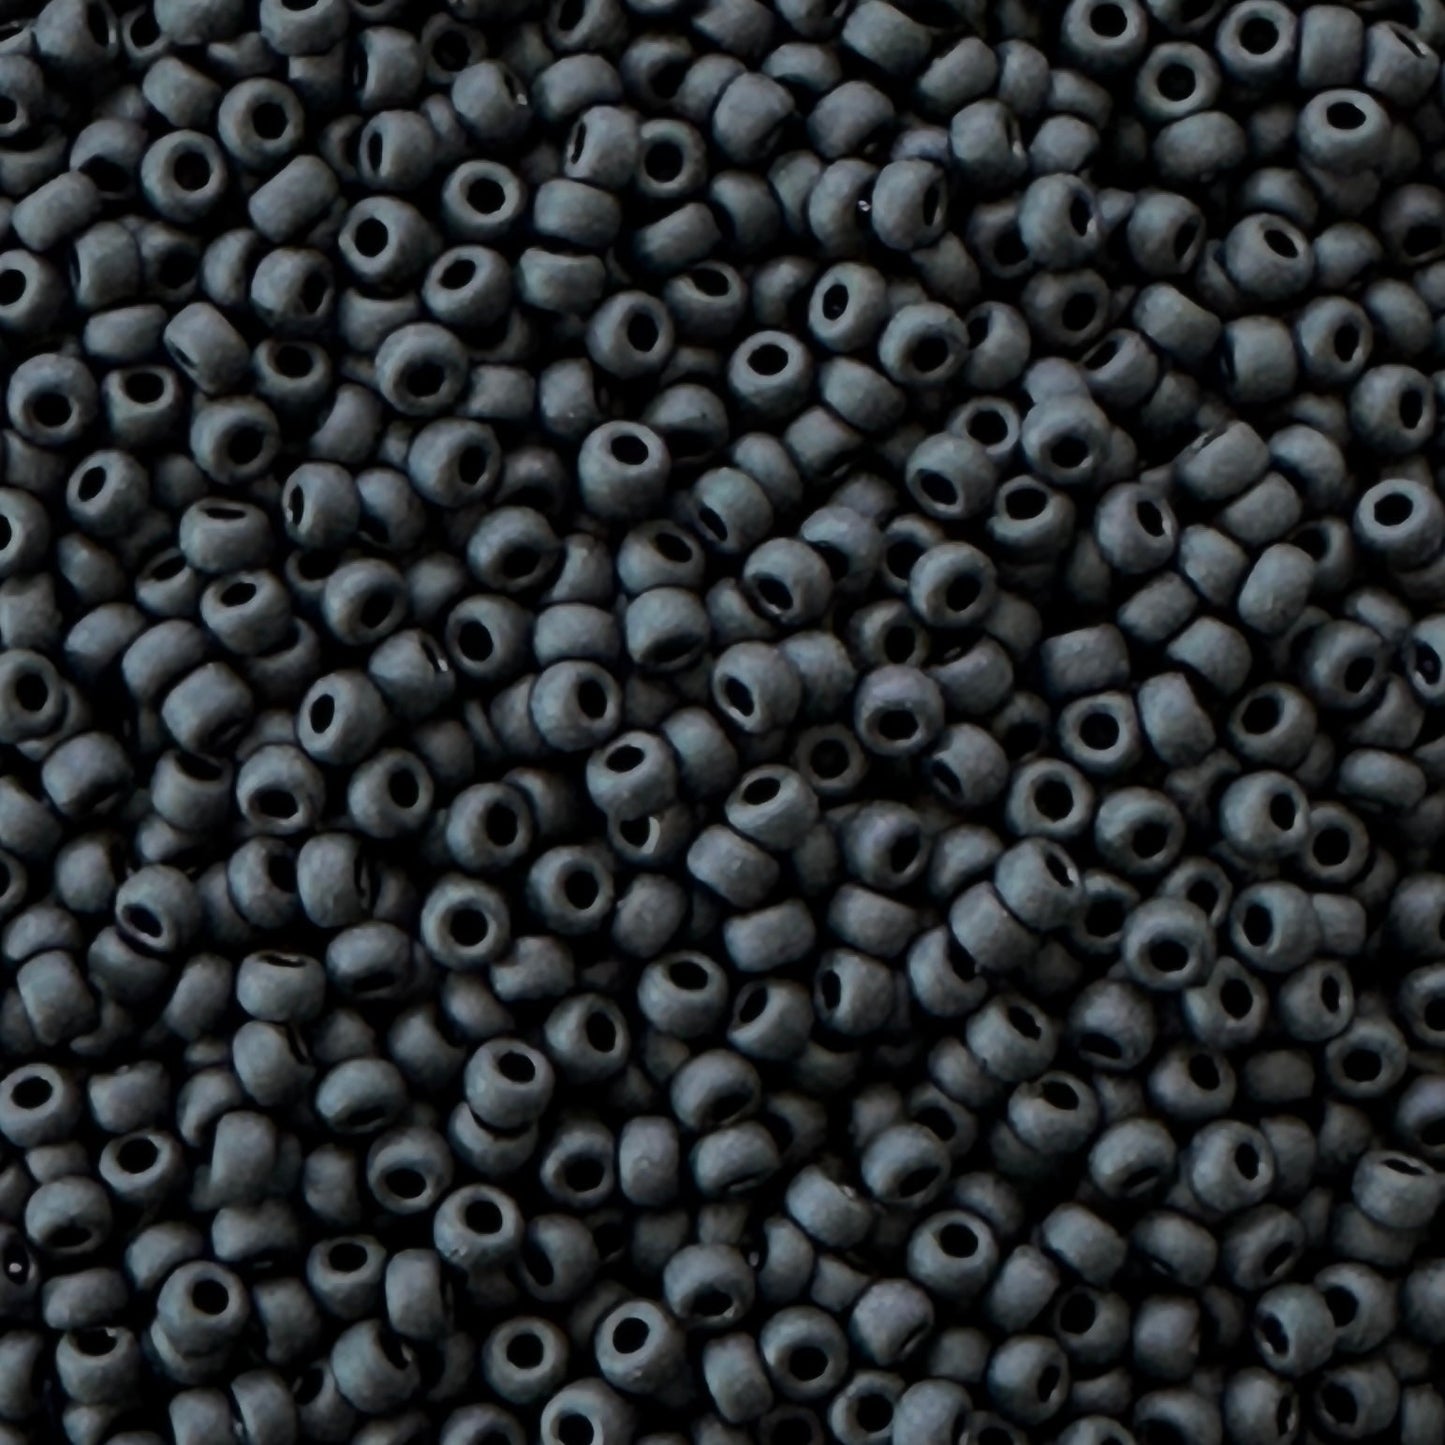 Matte Black 401F Miyuki 11/0 Seed Beads offered for sale by The Bead Mix